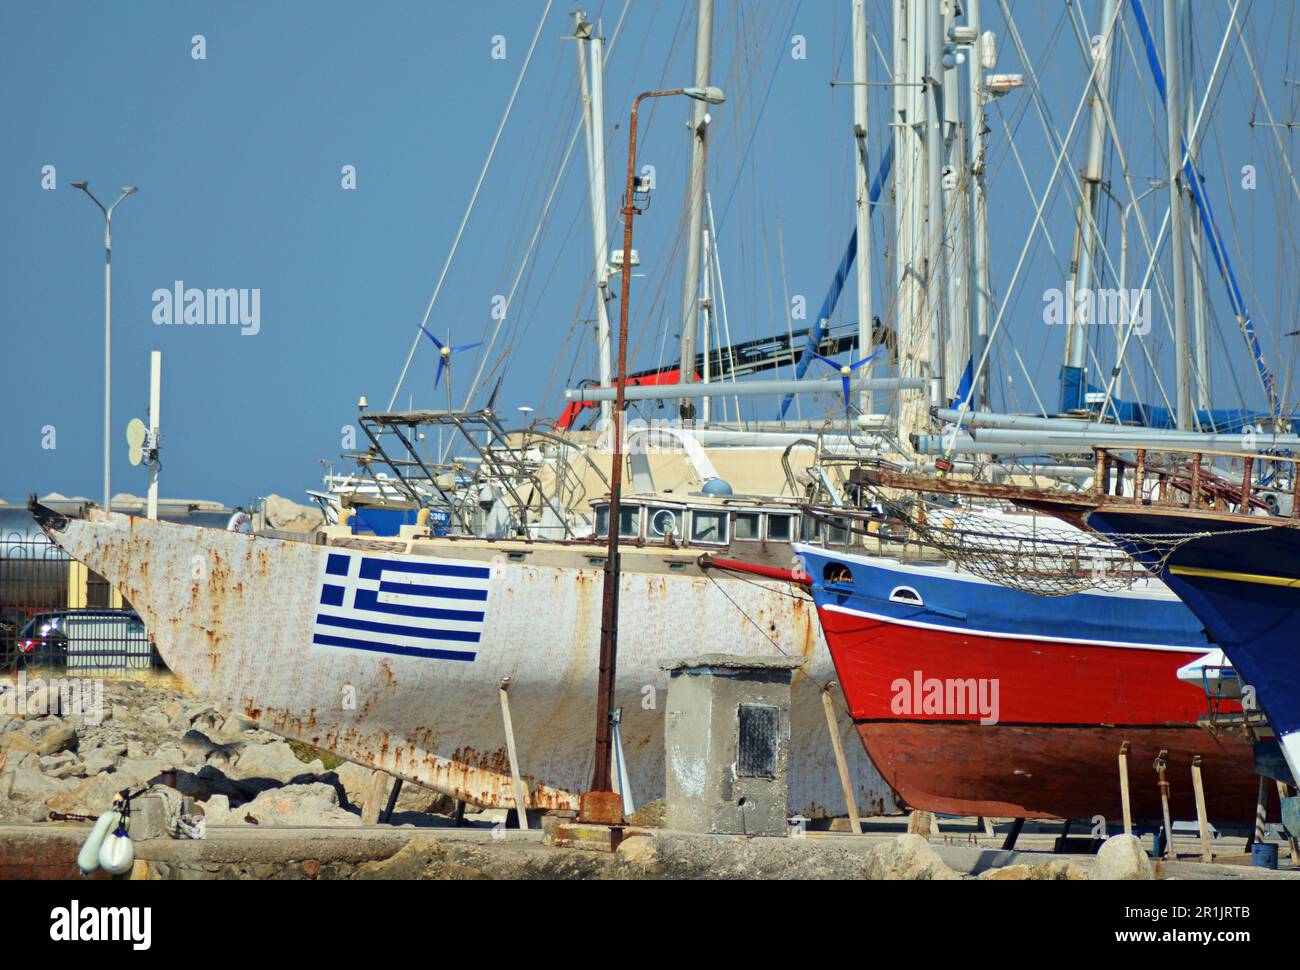 Ship dock, where ships with masts are repaired. One of the white ships has a Greek flag painted on it. The other ship is blue and red. Stock Photo